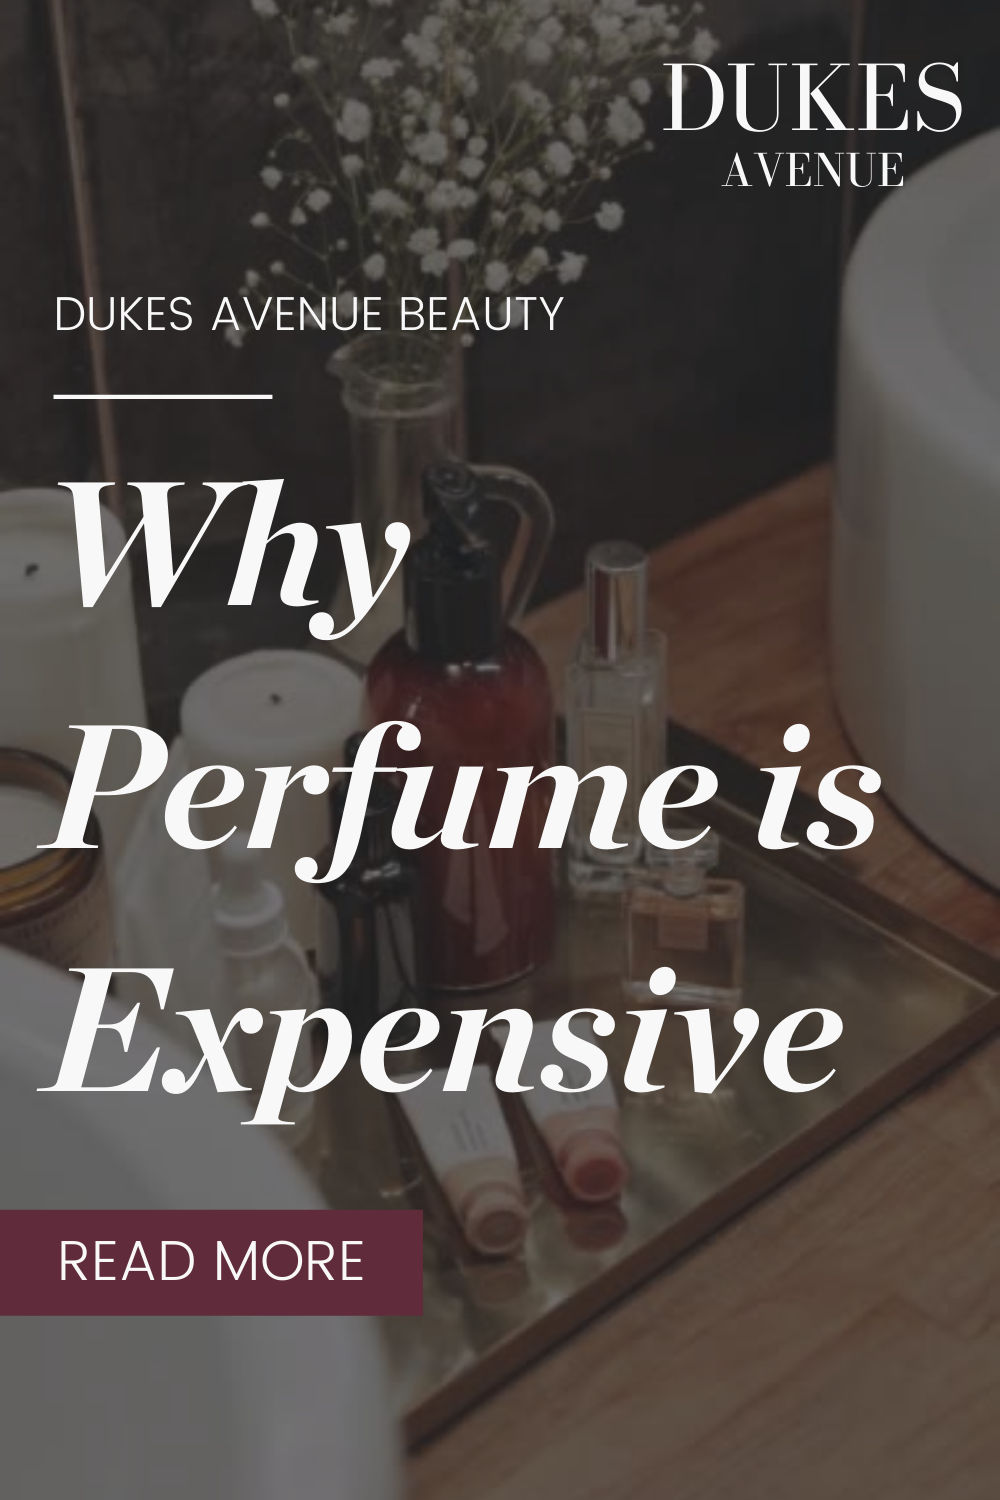 Bottles of perfume on a dressing table with text overlay 'Why Perfume is Expensive'